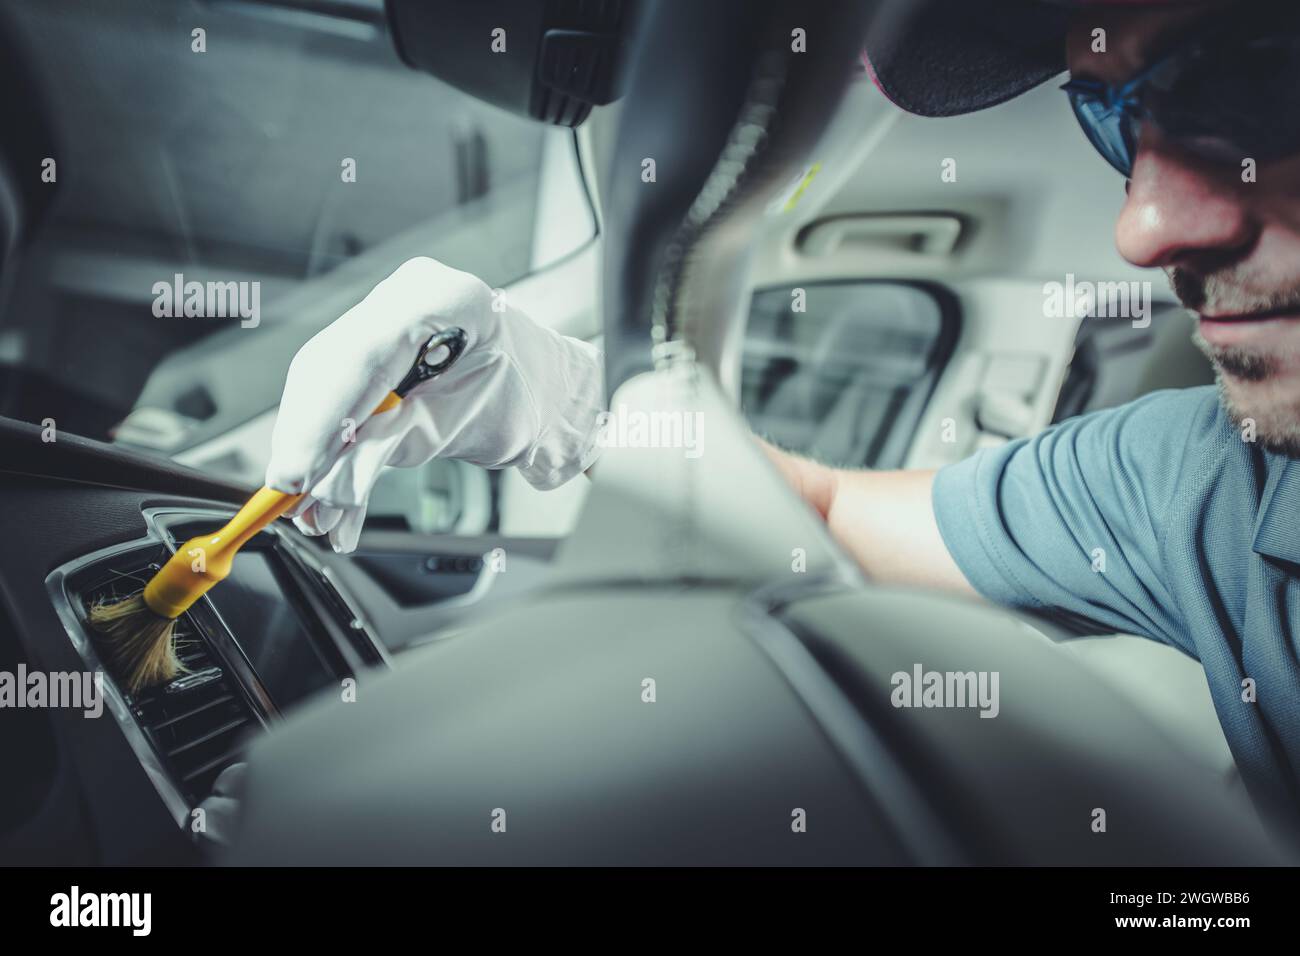 Detailed Car Interior Cleaning Using Professional Brushes. Vehicle Detailing Performed by Caucasian Worker. Stock Photo